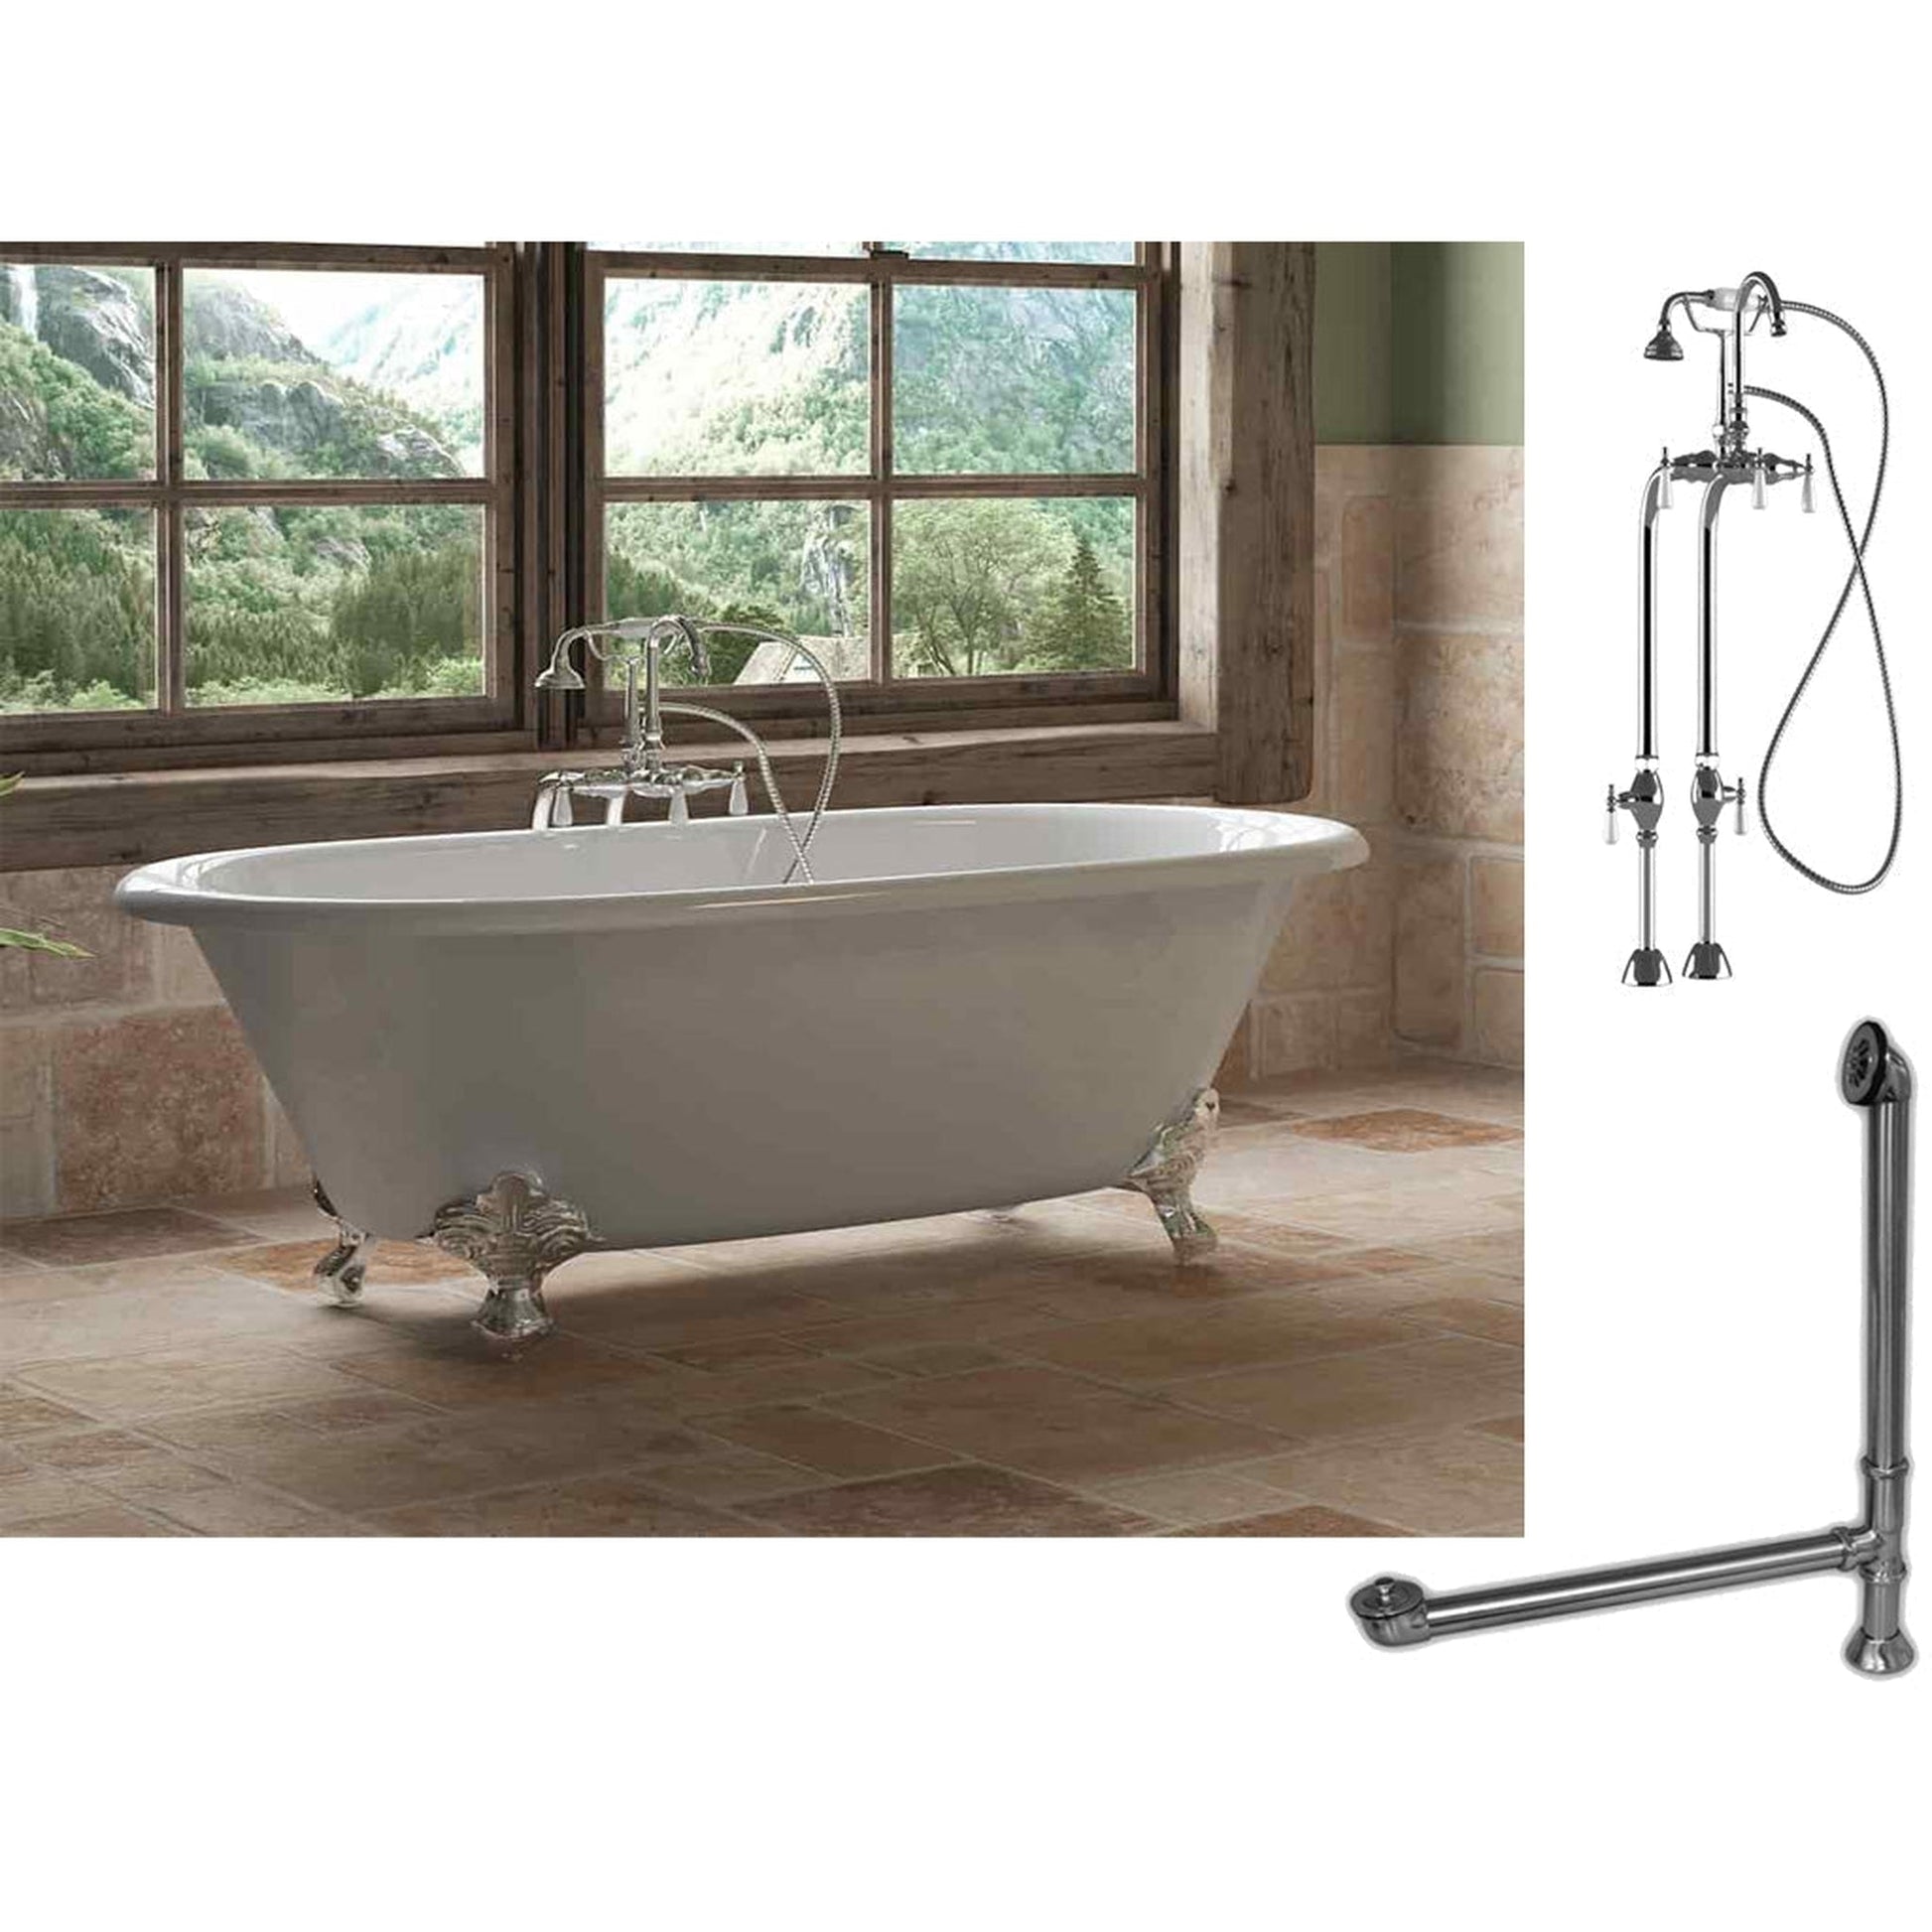 Cambridge Plumbing 67" White Cast Iron Double Ended Clawfoot Bathtub With No Deck Holes And Complete Plumbing Package Including Freestanding English Telephone Gooseneck Faucet, Drain And Overflow Assembly In Polished Chrome